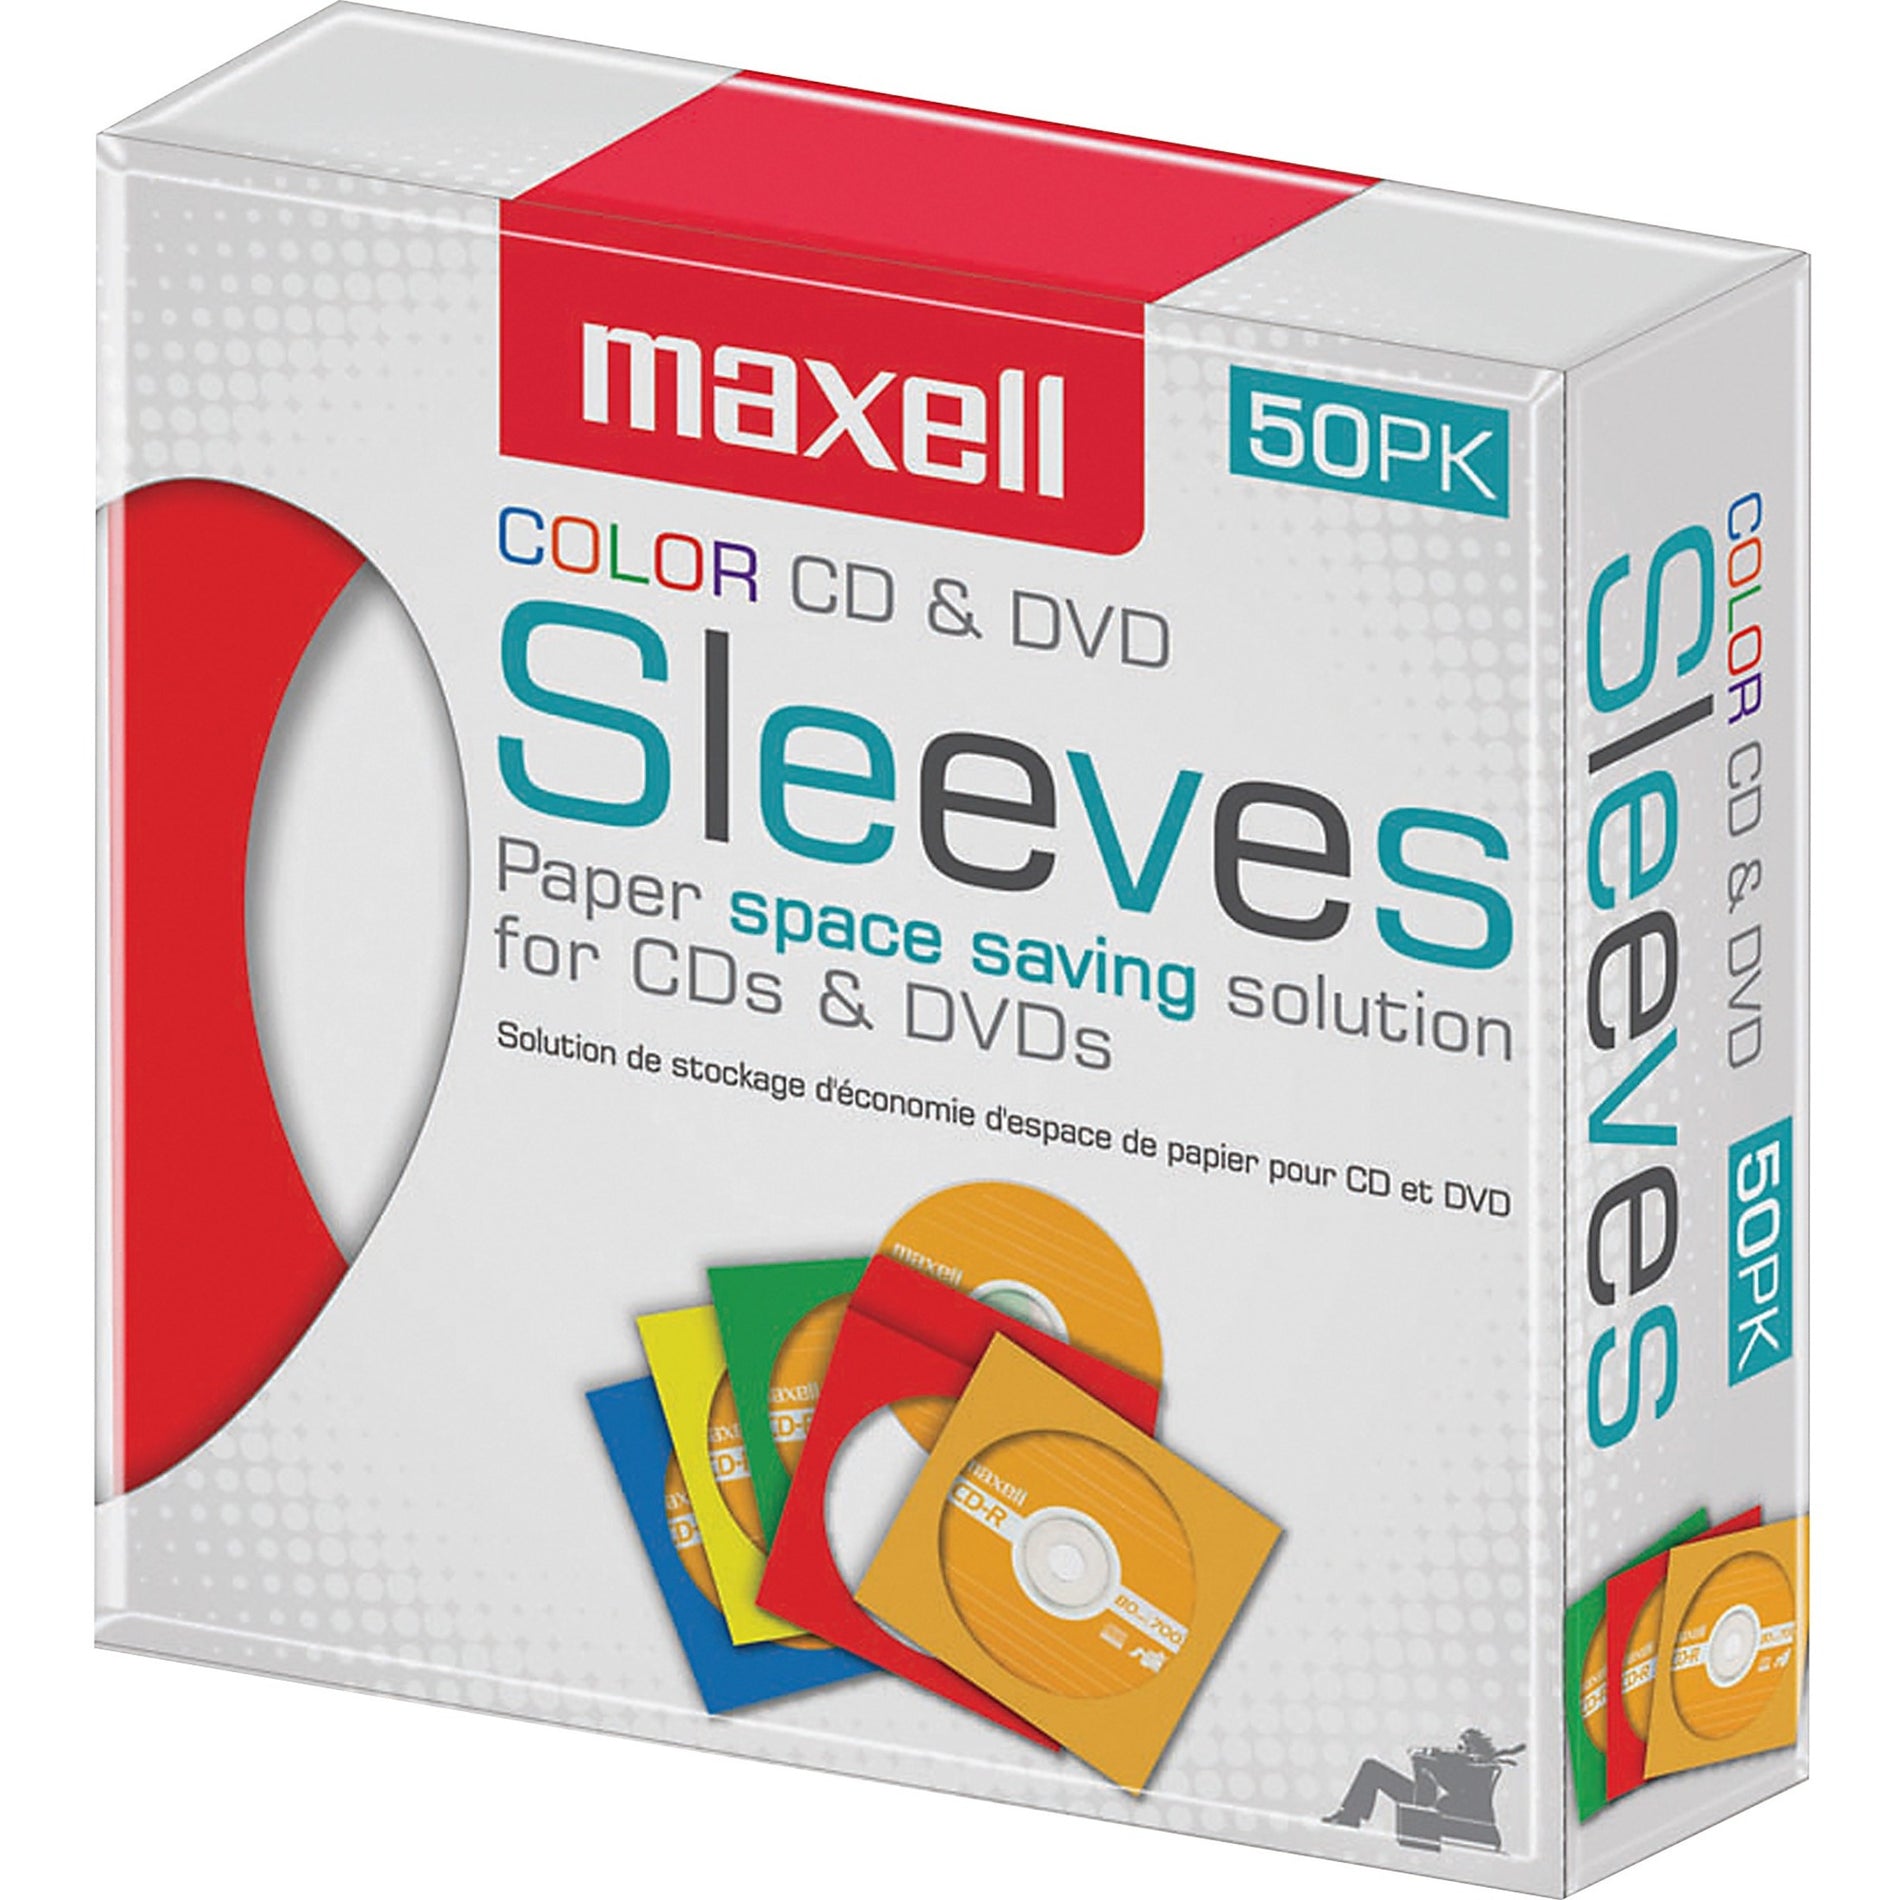 Maxell CD-401 Multi-Color CD & DVD Sleeve (190134) [Discontinued]